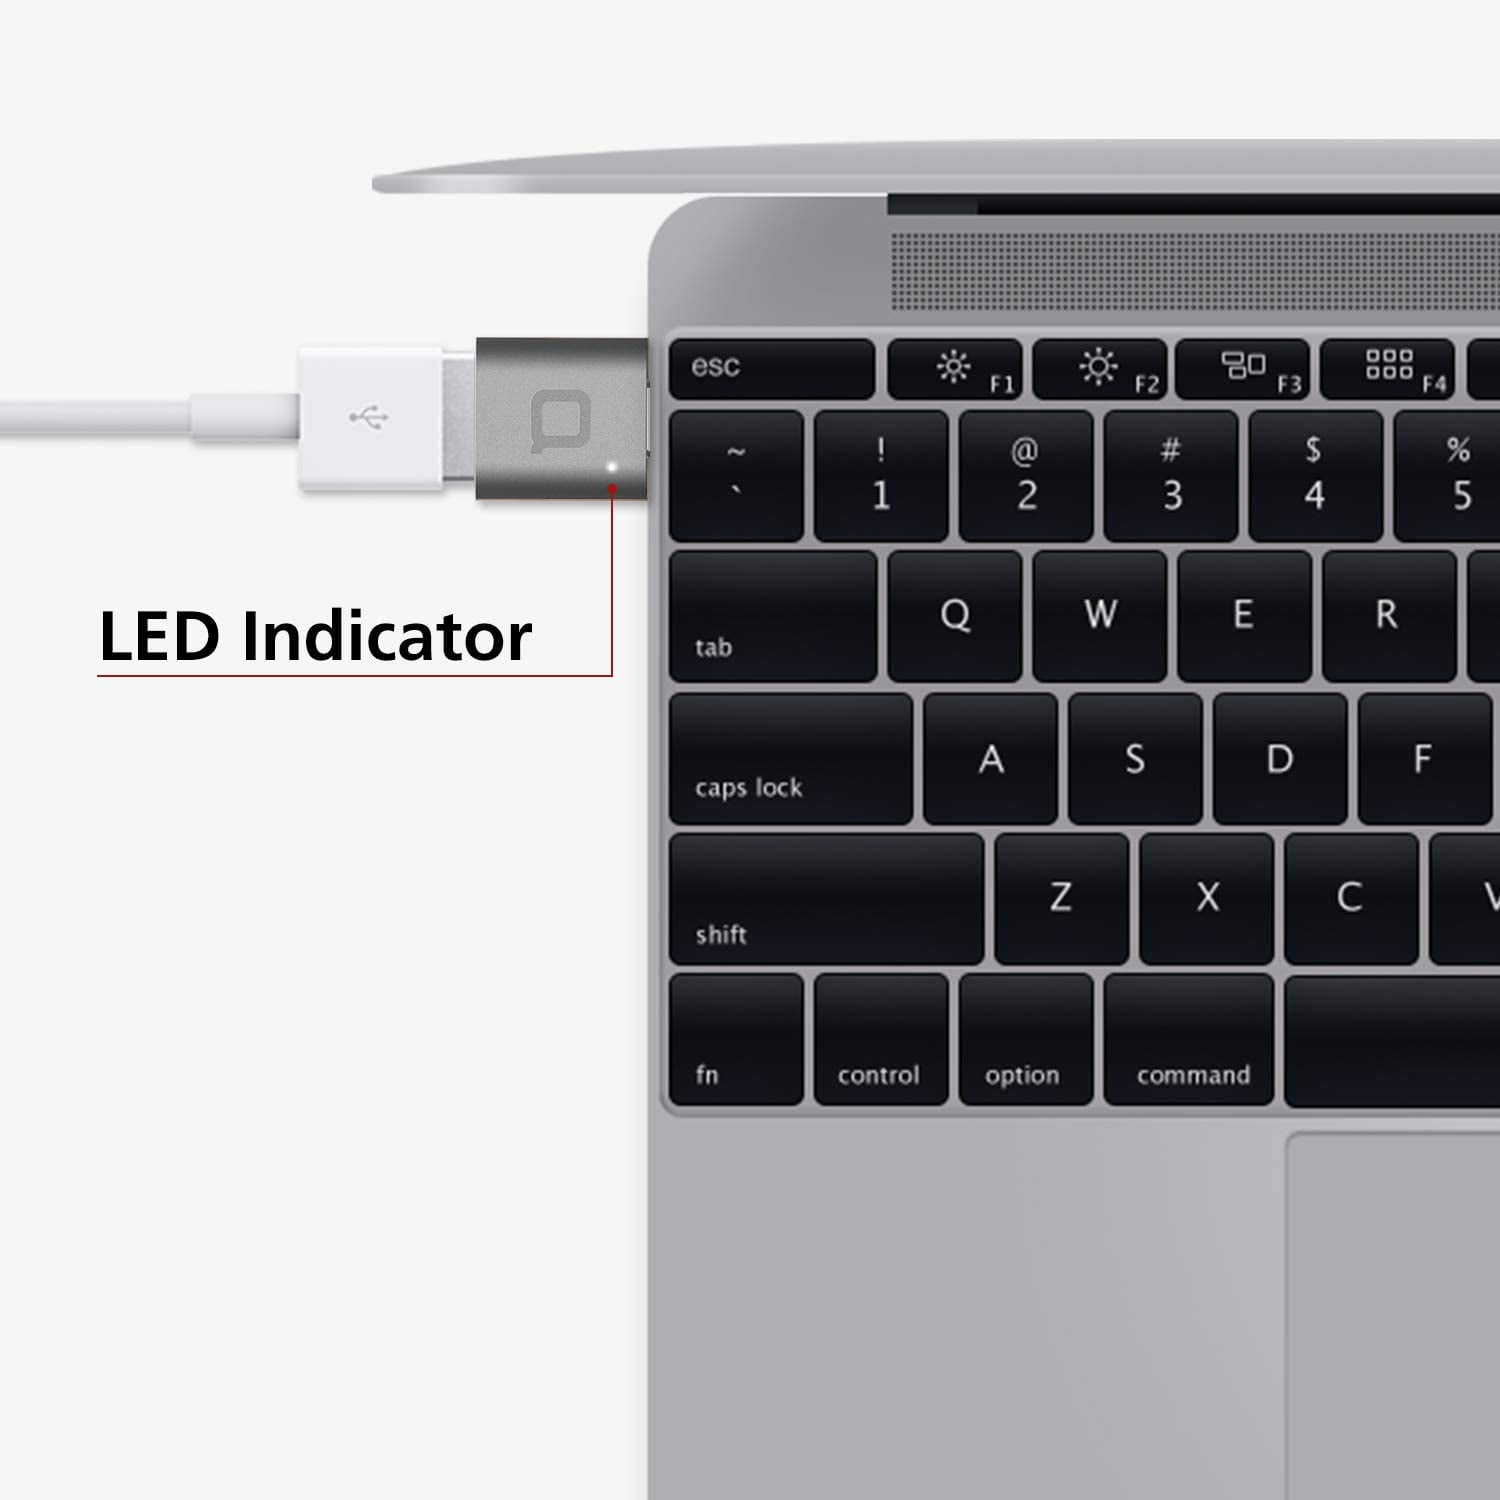 Pixel 3 Dell XPS and More Type-C Devices Silver Thunderbolt 3 to USB Adapter Aluminum with Indicator LED for MacBook Pro 2018/2017 nonda USB Type C to USB 3.0 Adapter MacBook Air 2018